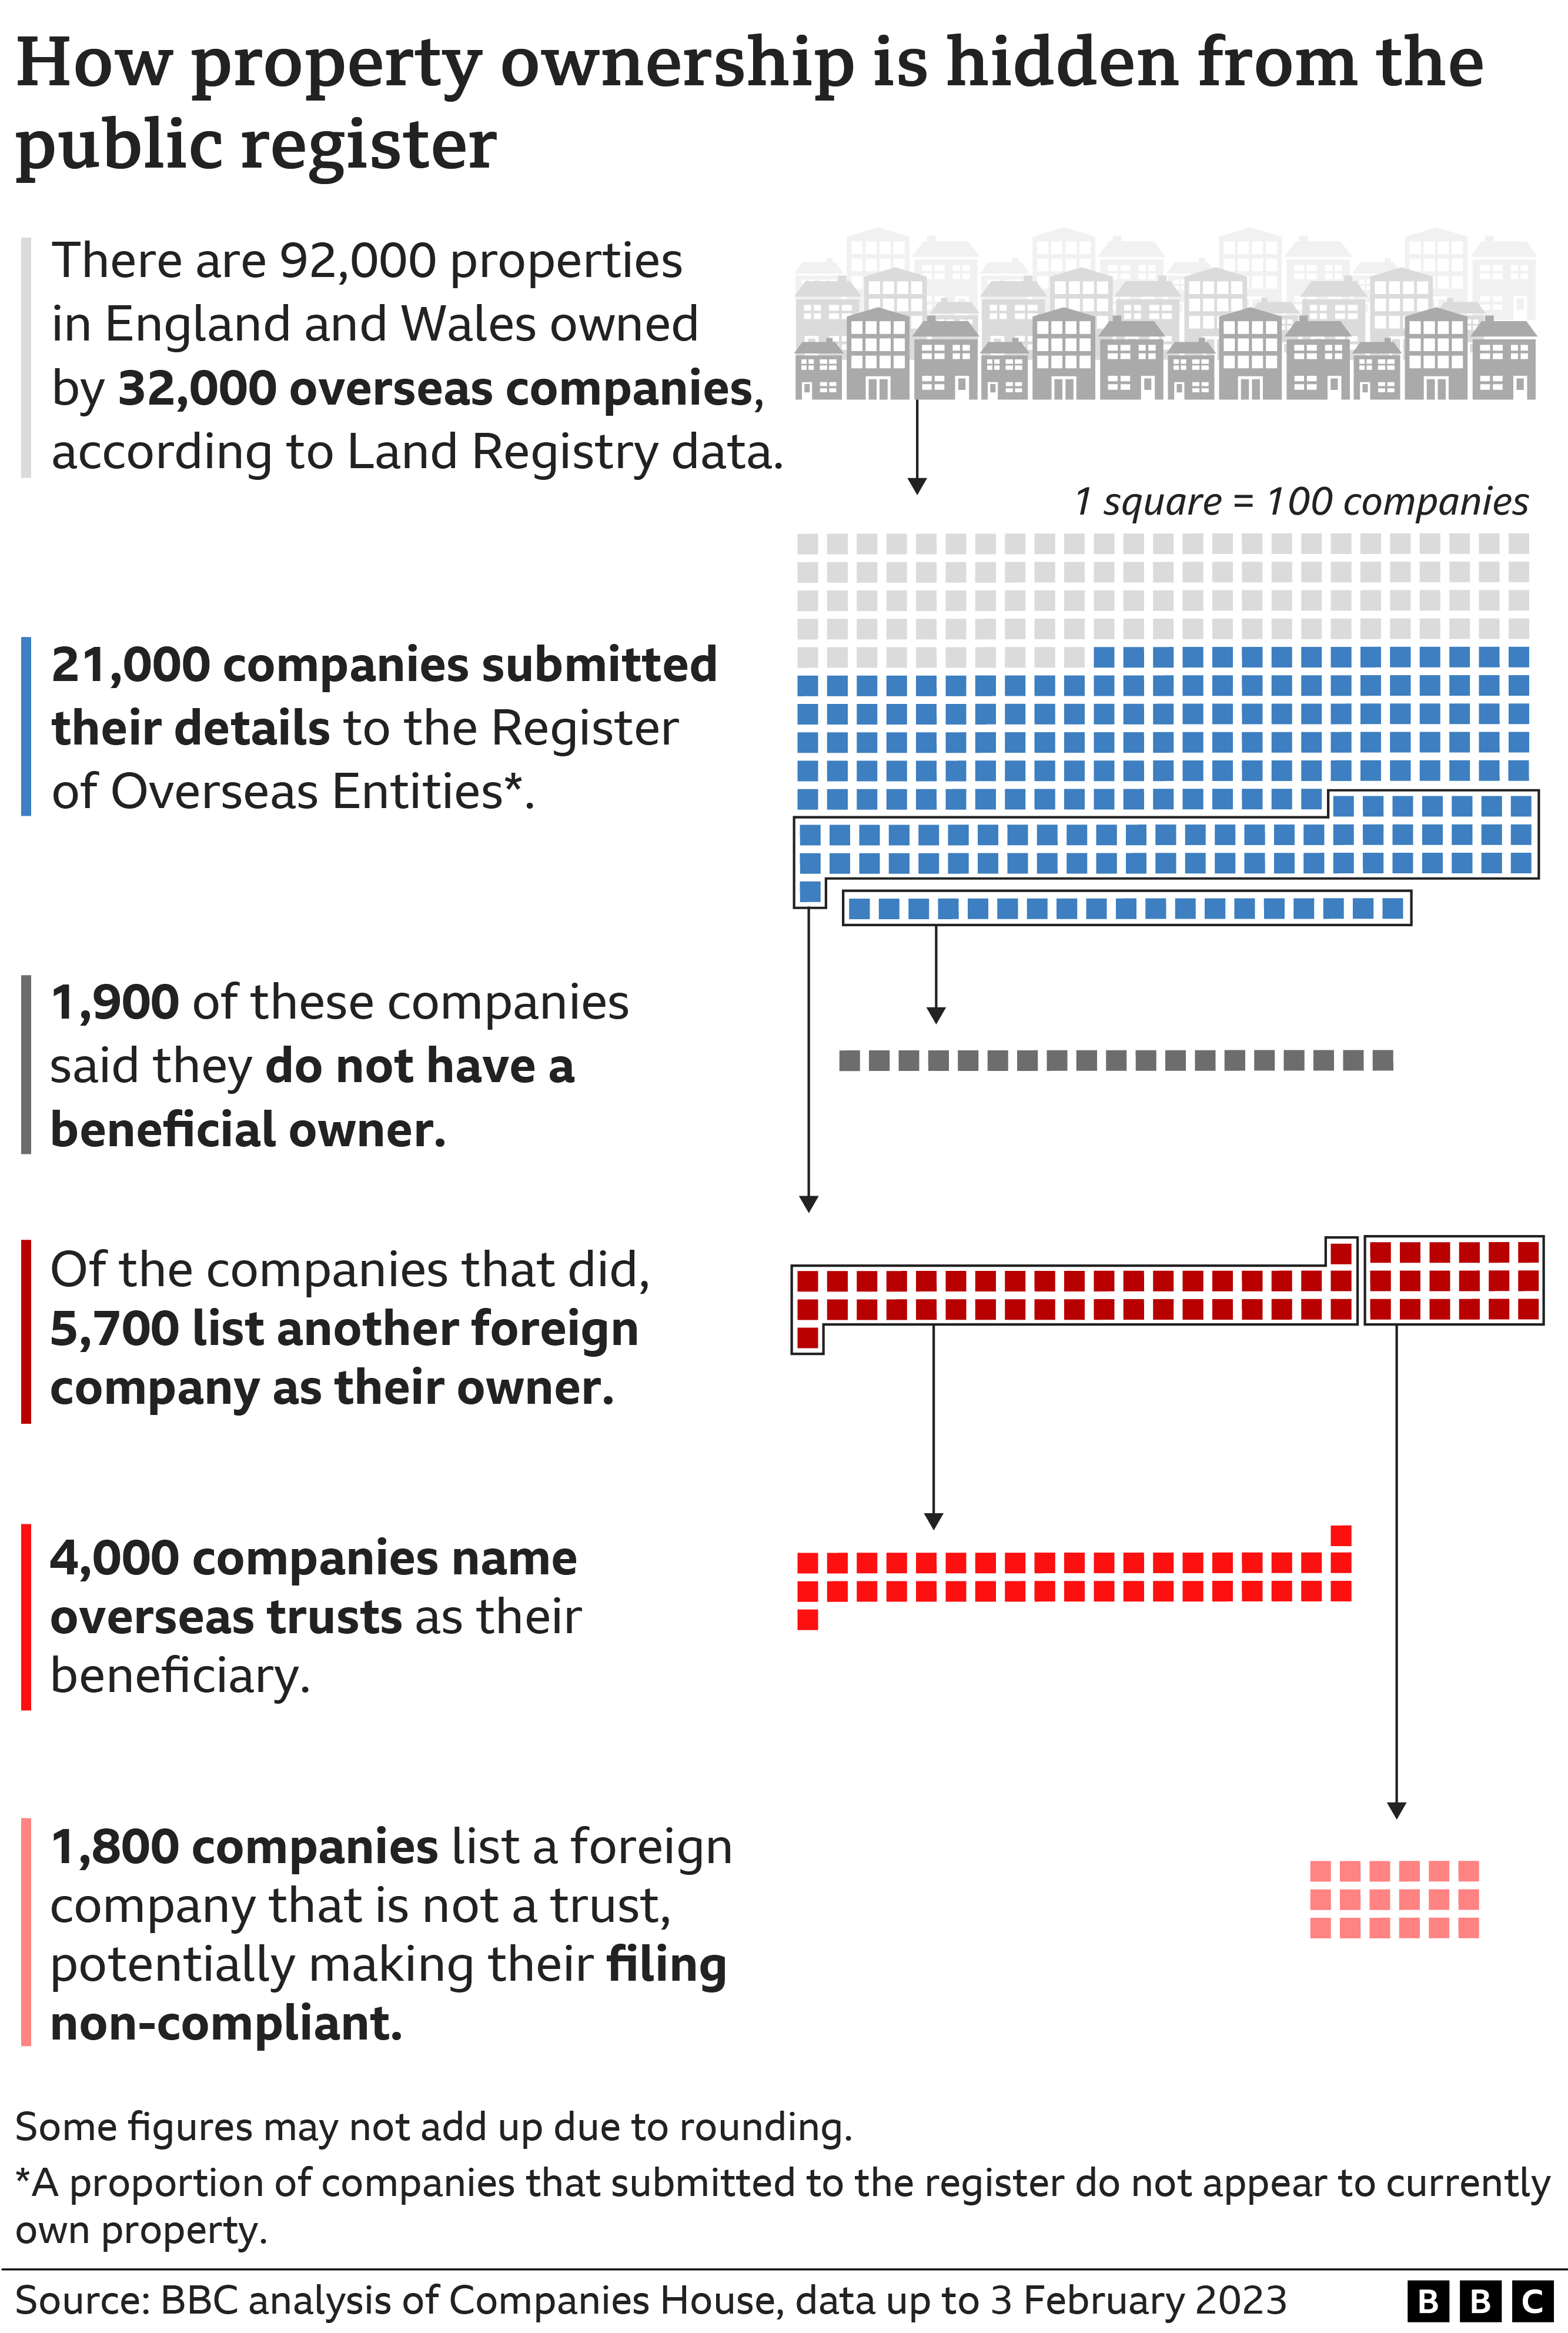 Infographic showing that of the 92,000 England and Wales properties owned by 32,000 overseas companies, 21,000 companies submitted to the register; 1,900 do not list a beneficial owner; 5,700 list a foreign company; 4,000 name overseas trusts; and 1,800 list a foreign company that is not a trust, potentially making their filing non-compliant.